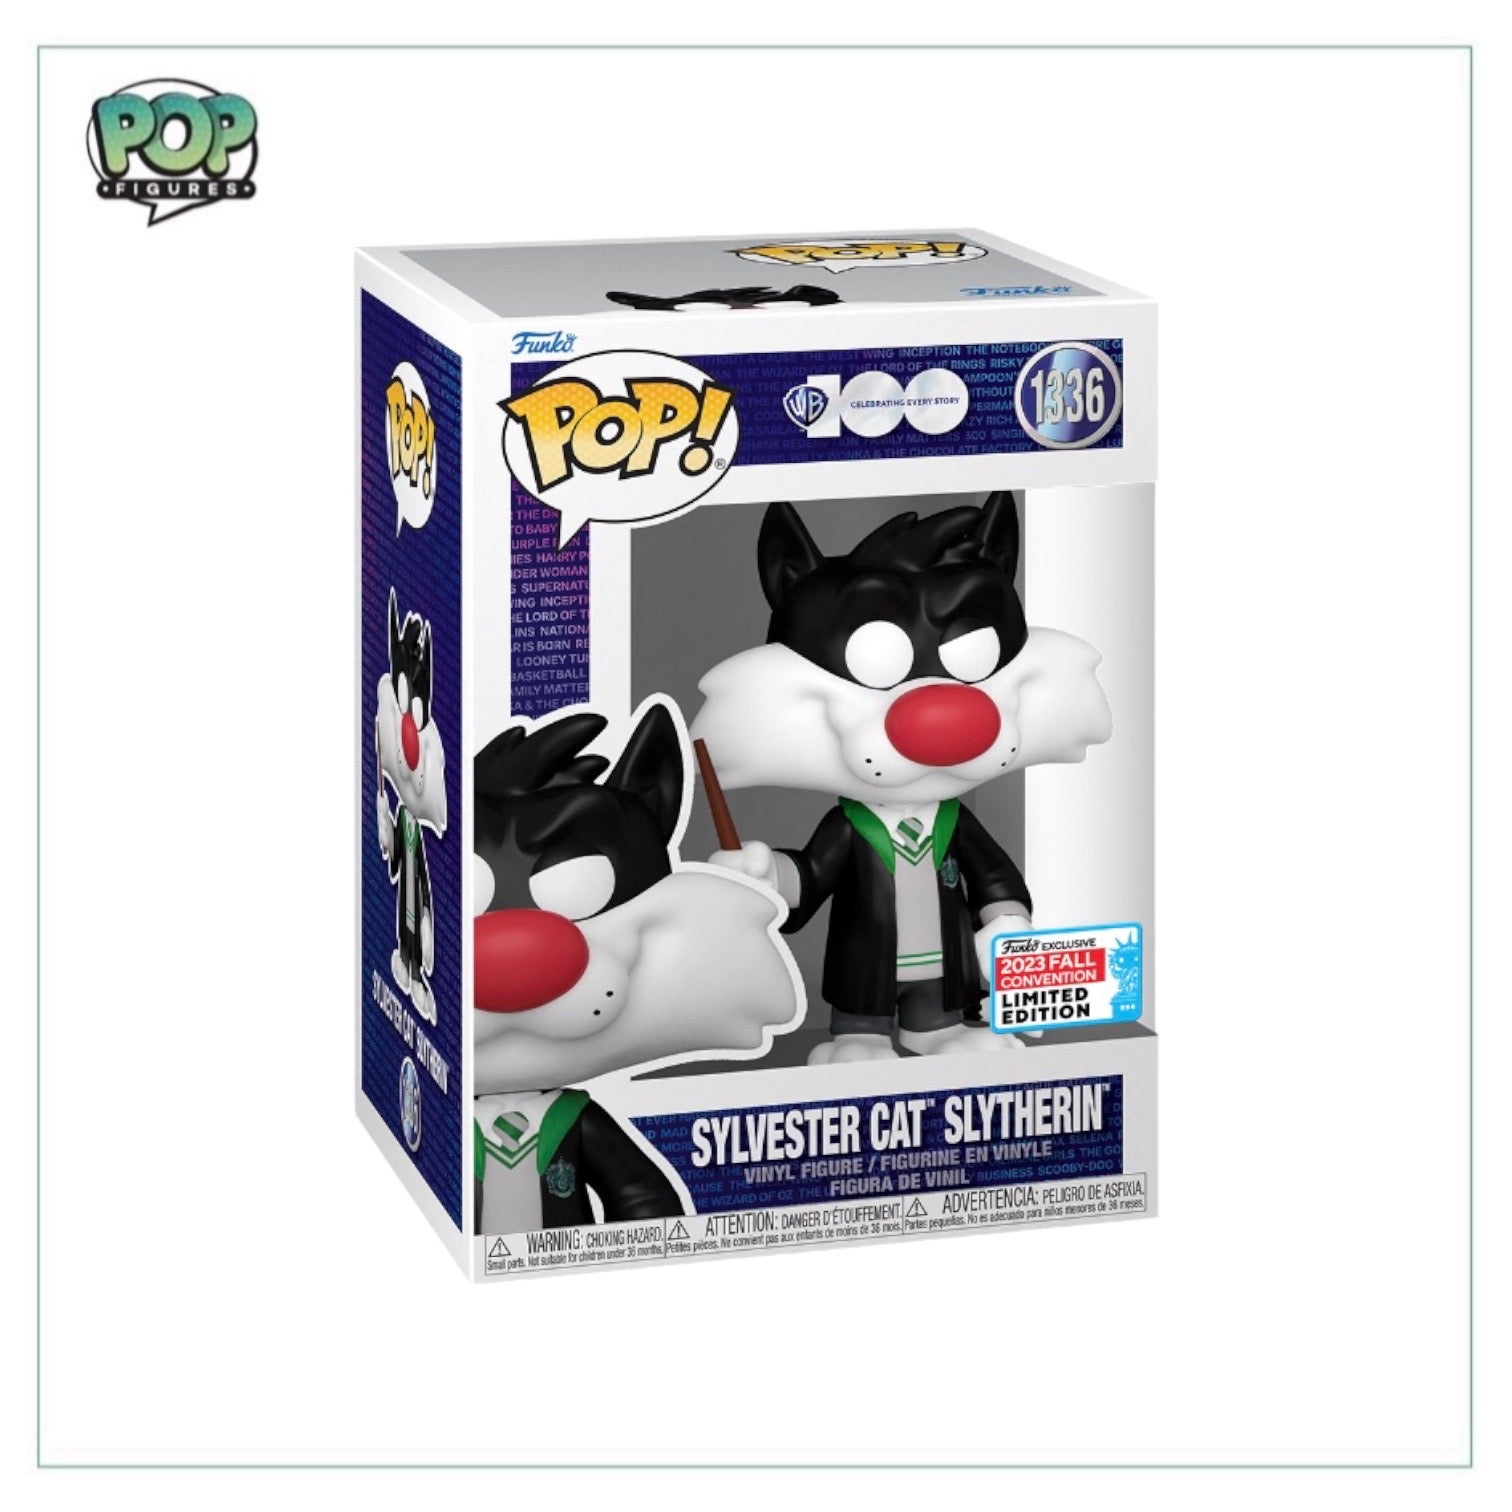 Sylvester Cat Slytherin #1336 Funko Pop! - WB100 - NYCC 2023 Shared Exclusive